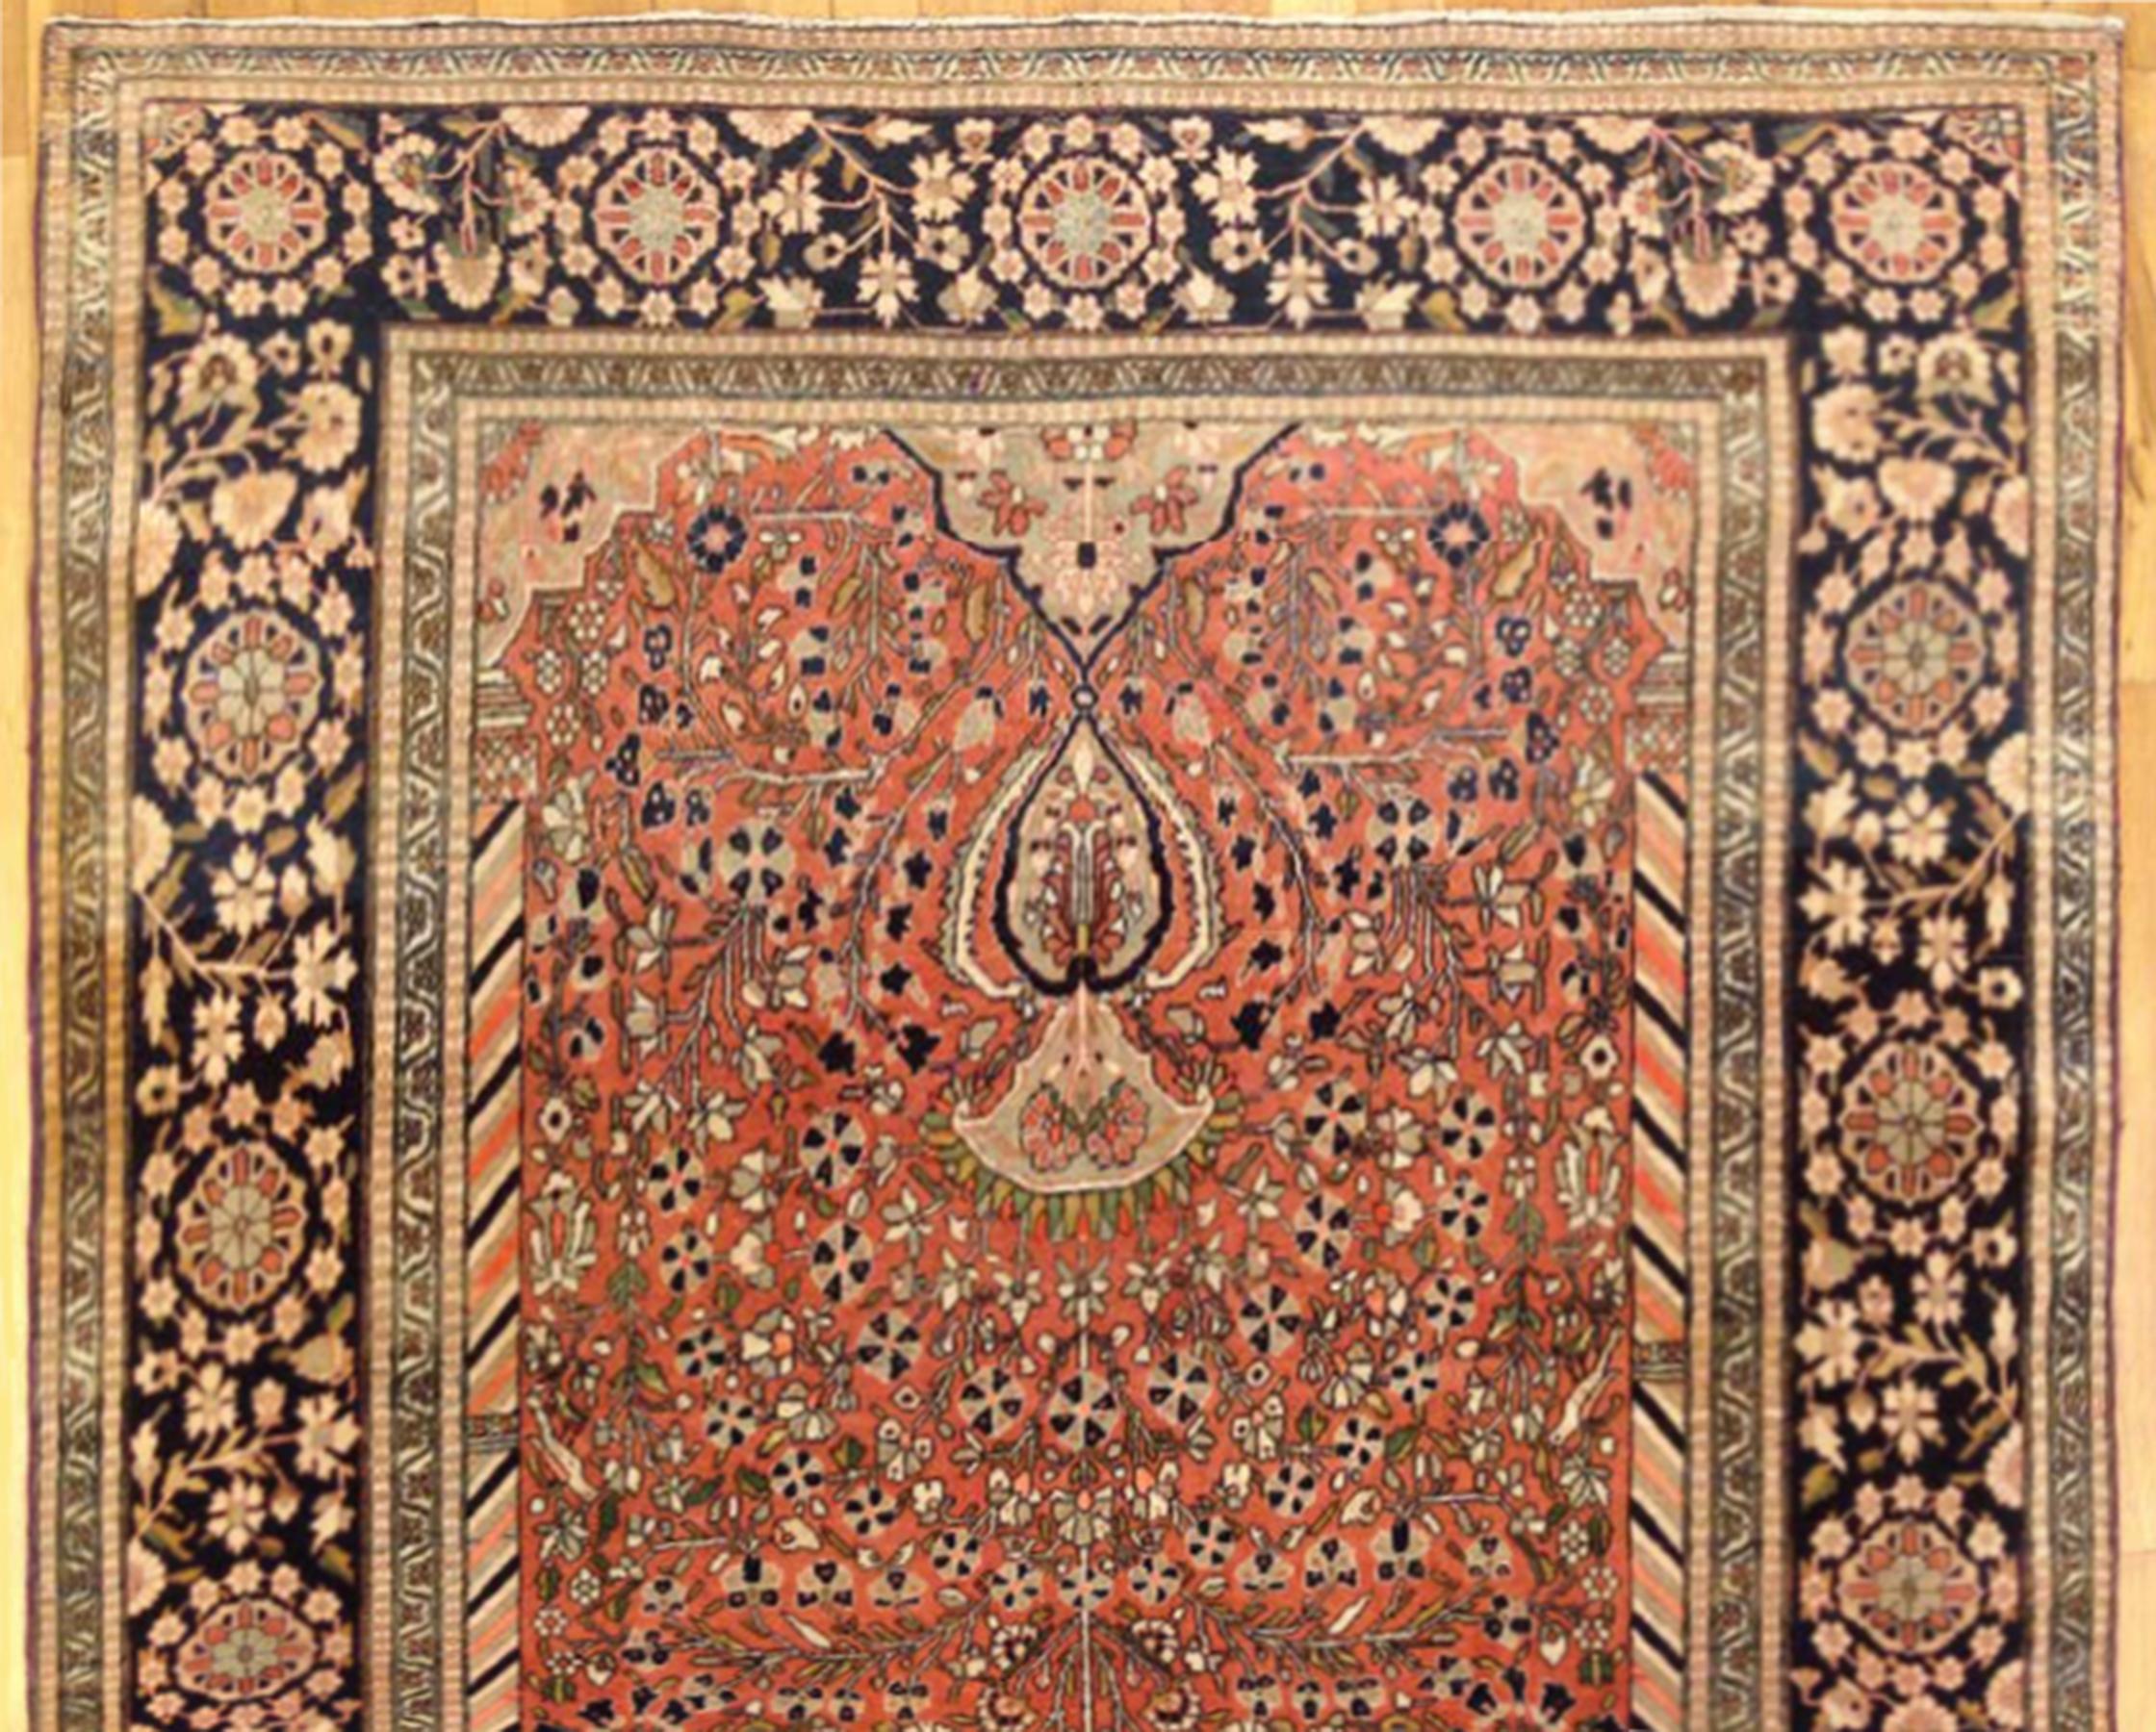 Late 19th Century Antique Persian Mohtesham Kashan Rug, Small Size with Lantern Design, circa 1890 For Sale